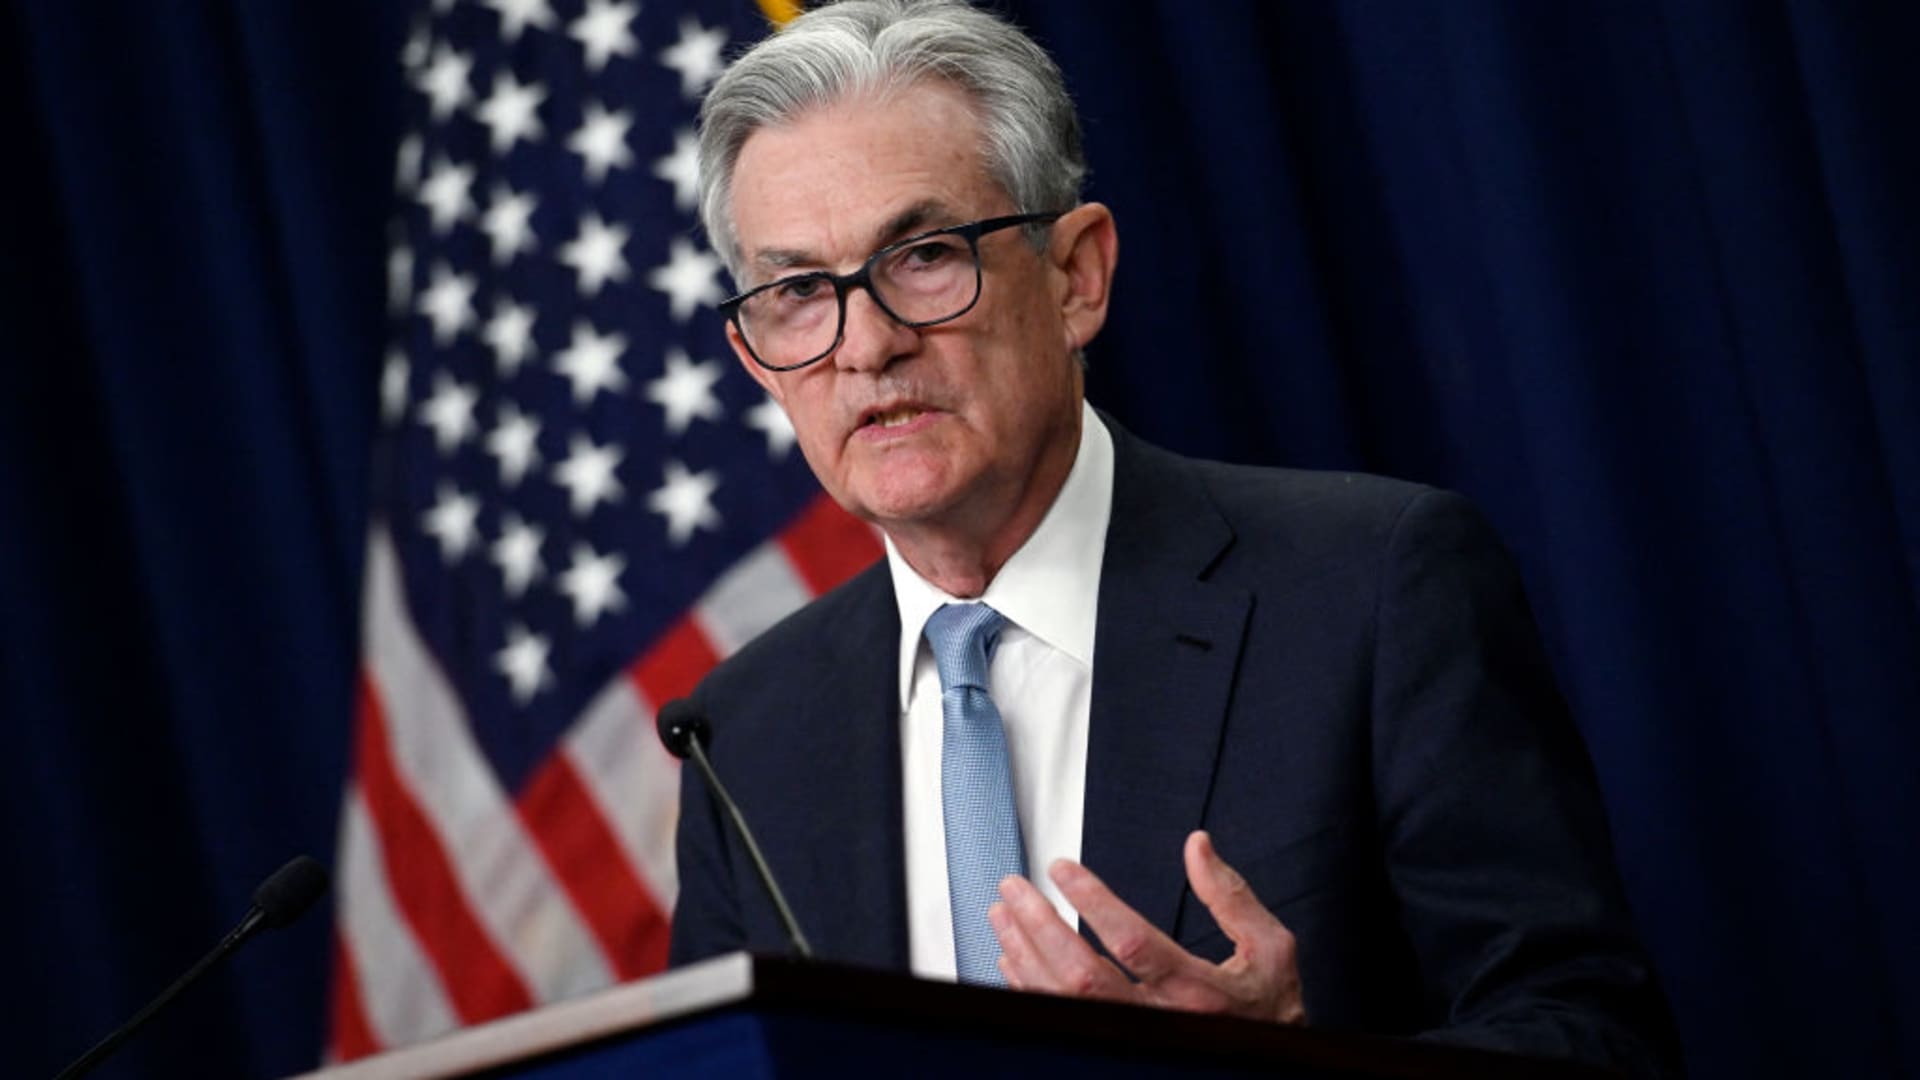 Here’s everything the Federal Reserve is expected to do Wednesday